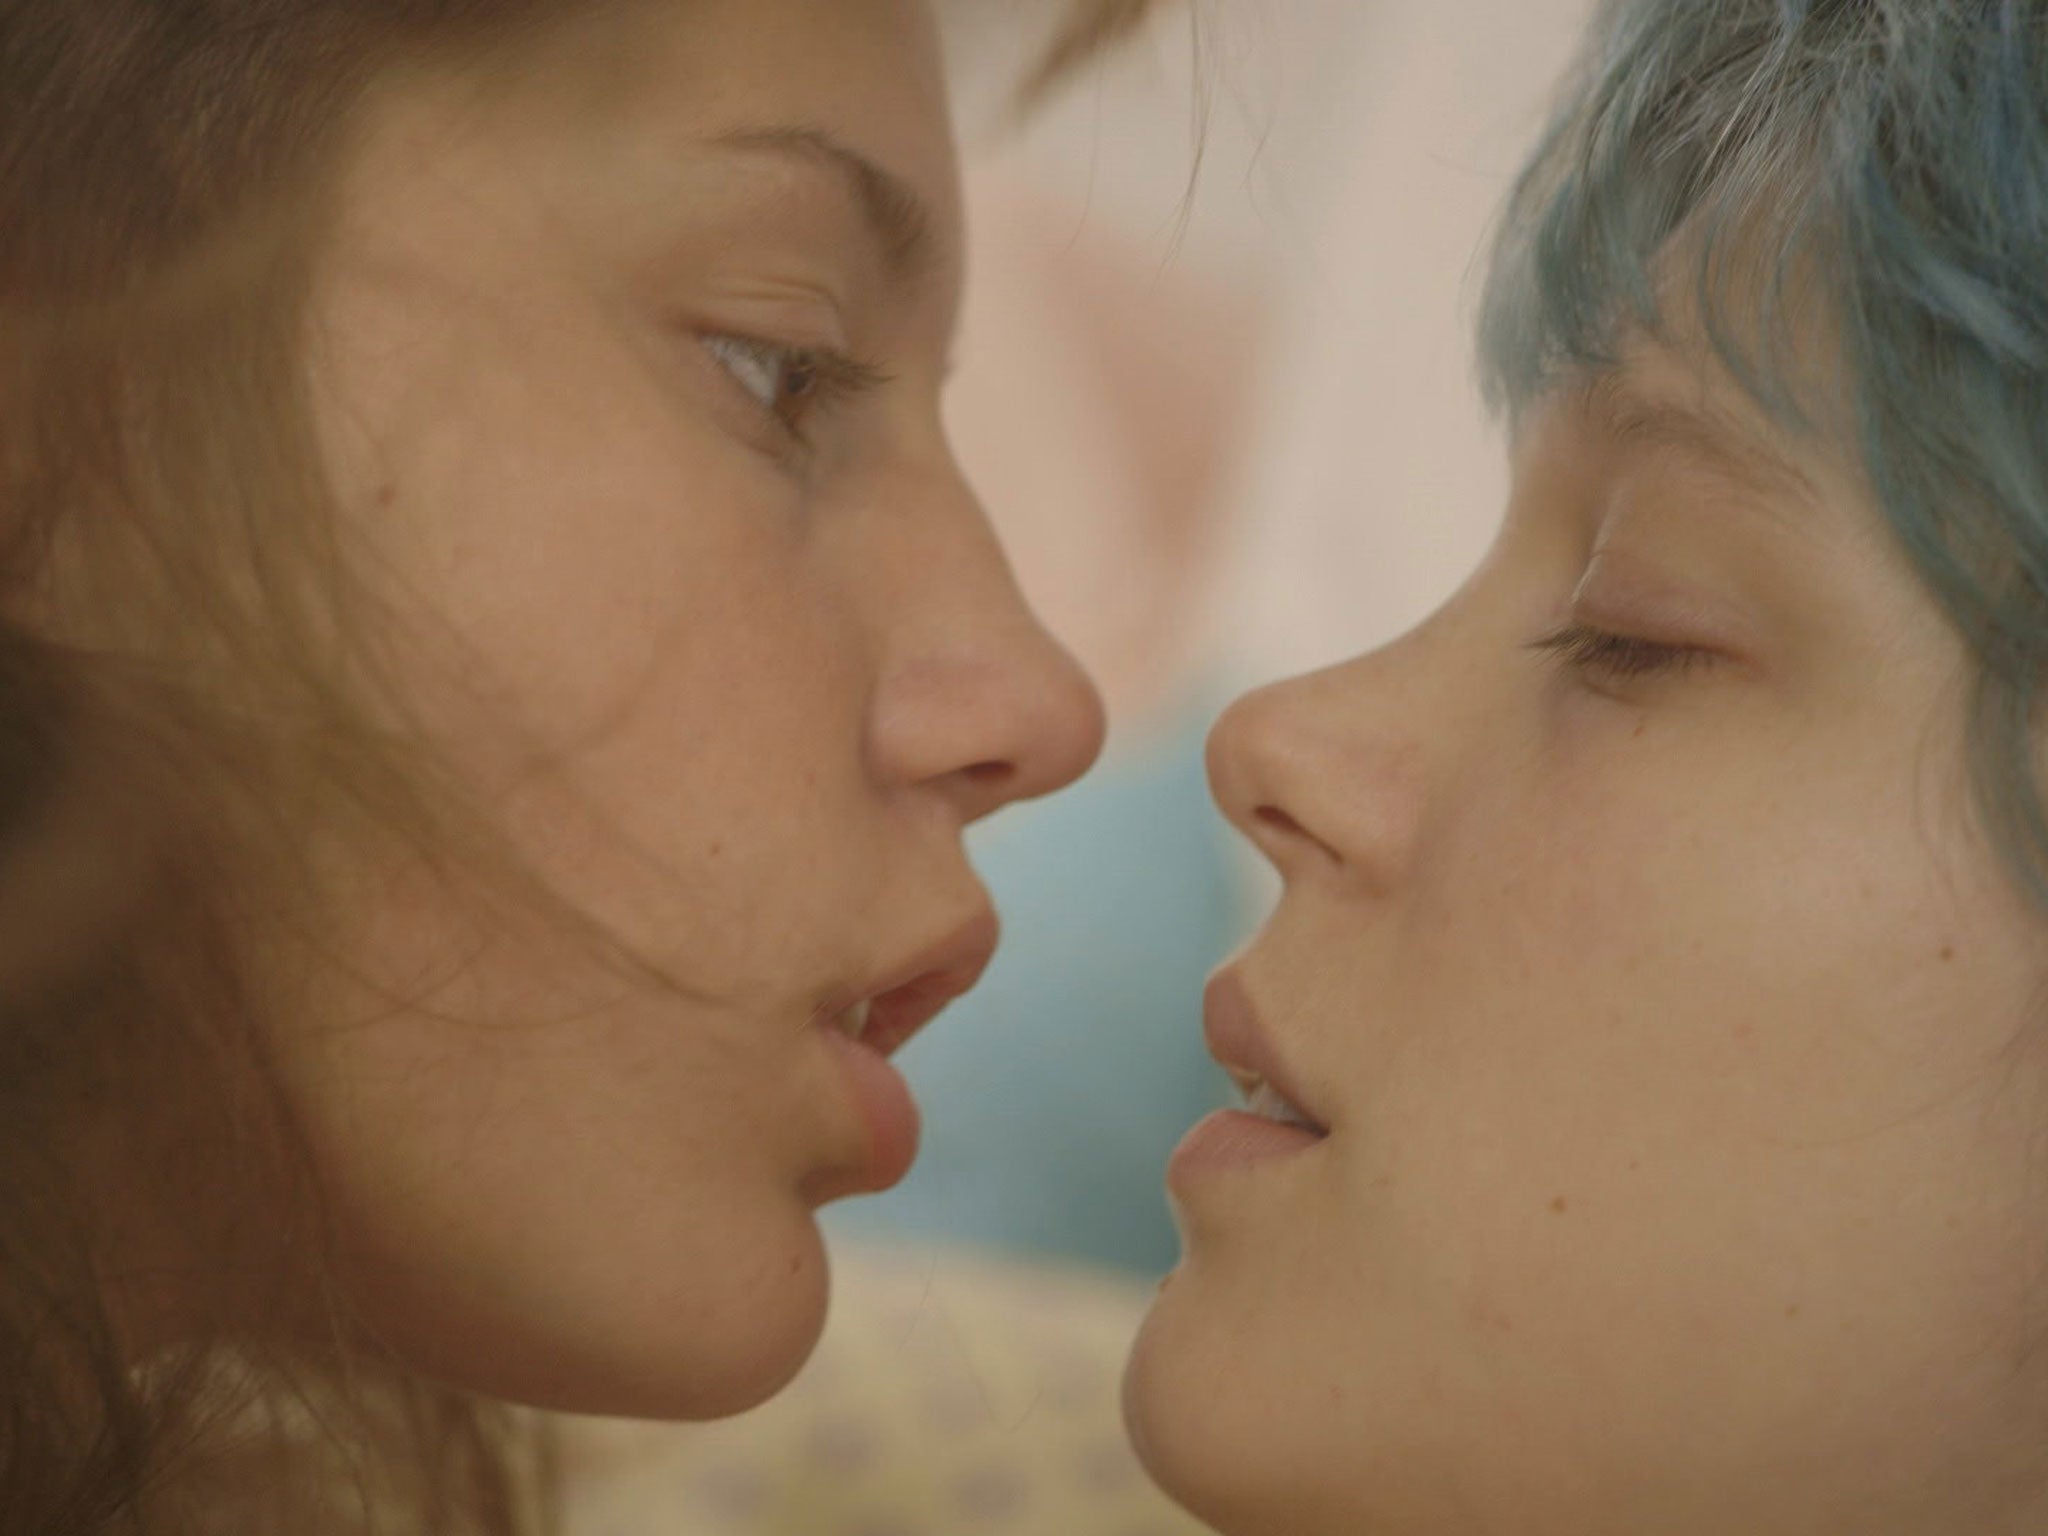 Adèle Exarchopoulos and Léa Seydoux play teeneage lovers in the French erotic drama 'Blue Is The Warmest Colour' - The survey found four times as many women admitting to same-sex experiences than 20 years ago